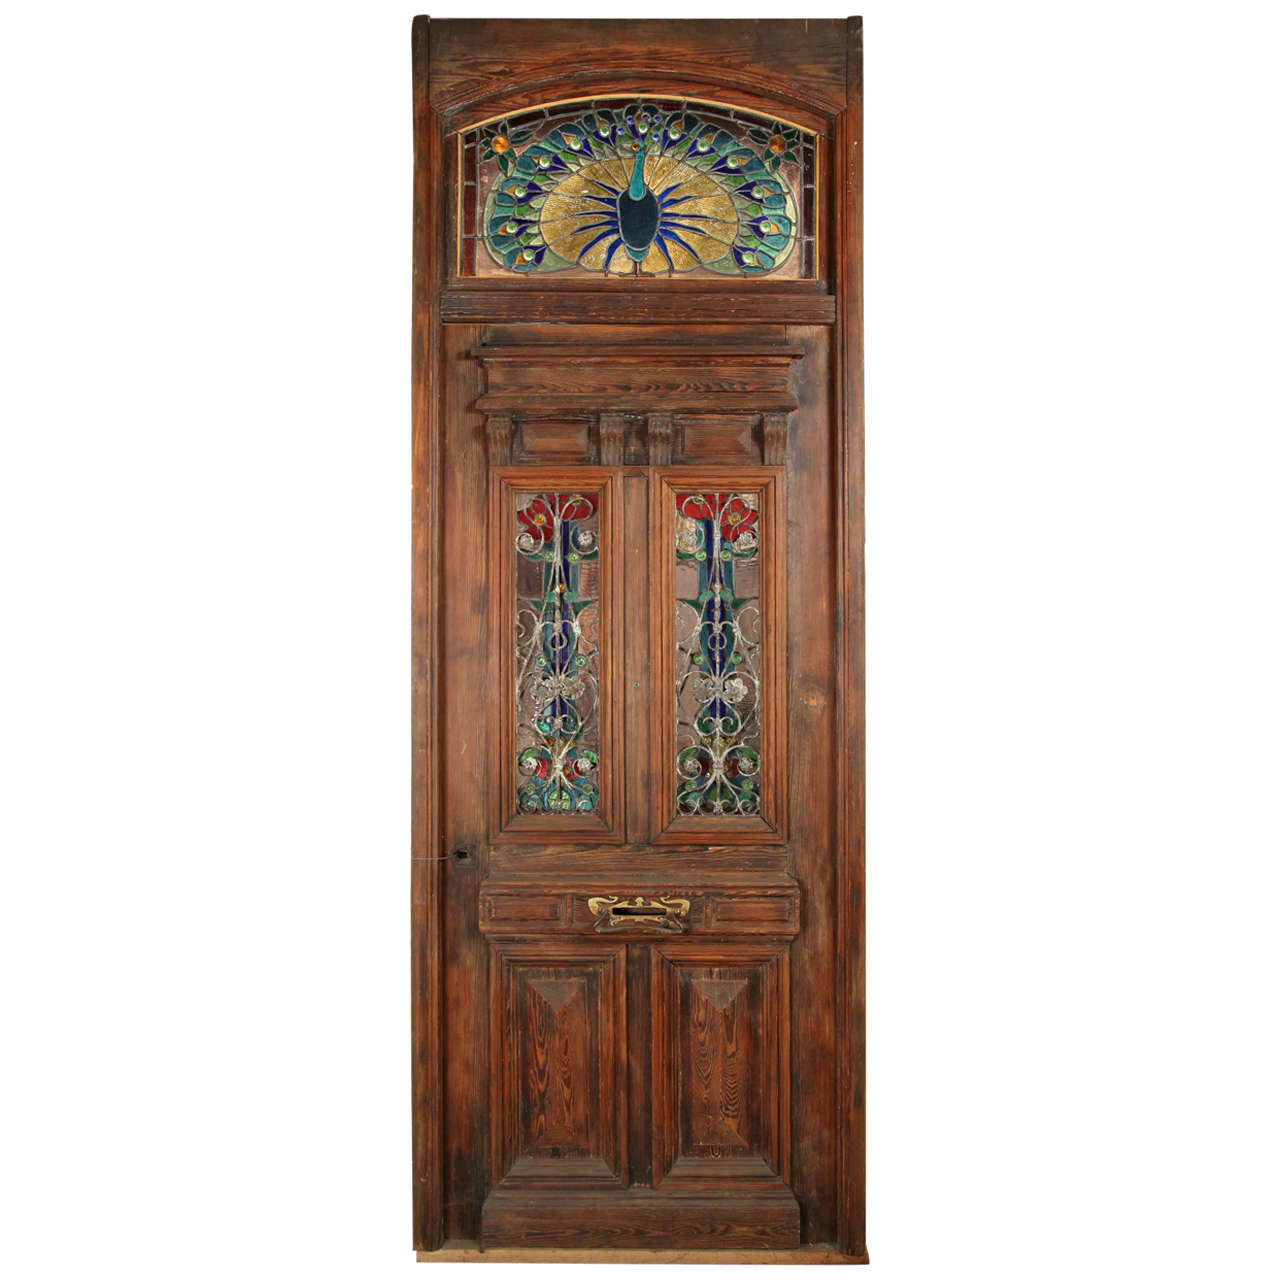 Heart Pine Entry Door with Stained Glass Windows; Peacock Transom